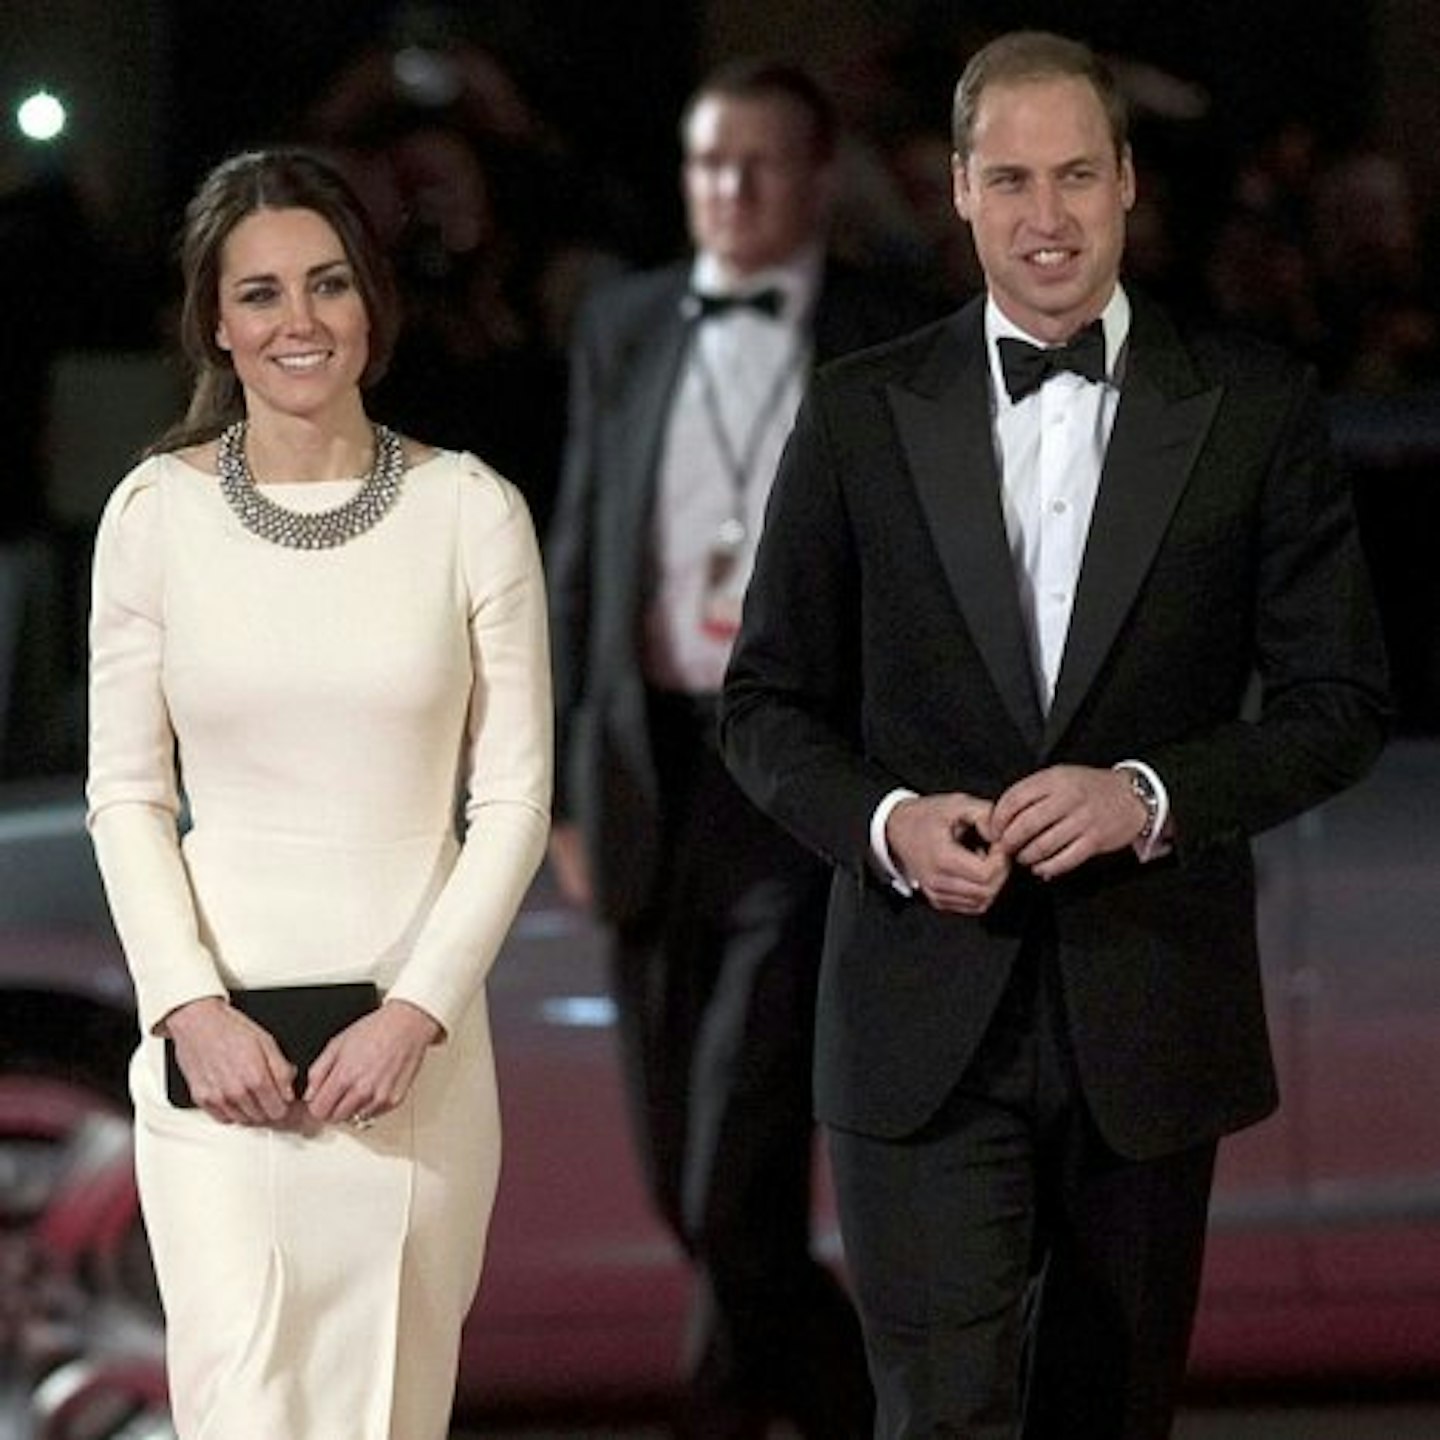 Before hearing the news; Prince William and Kate Middleton looked happy and relaxed as they arrived at the premiere of the Nelson Mandela biopic